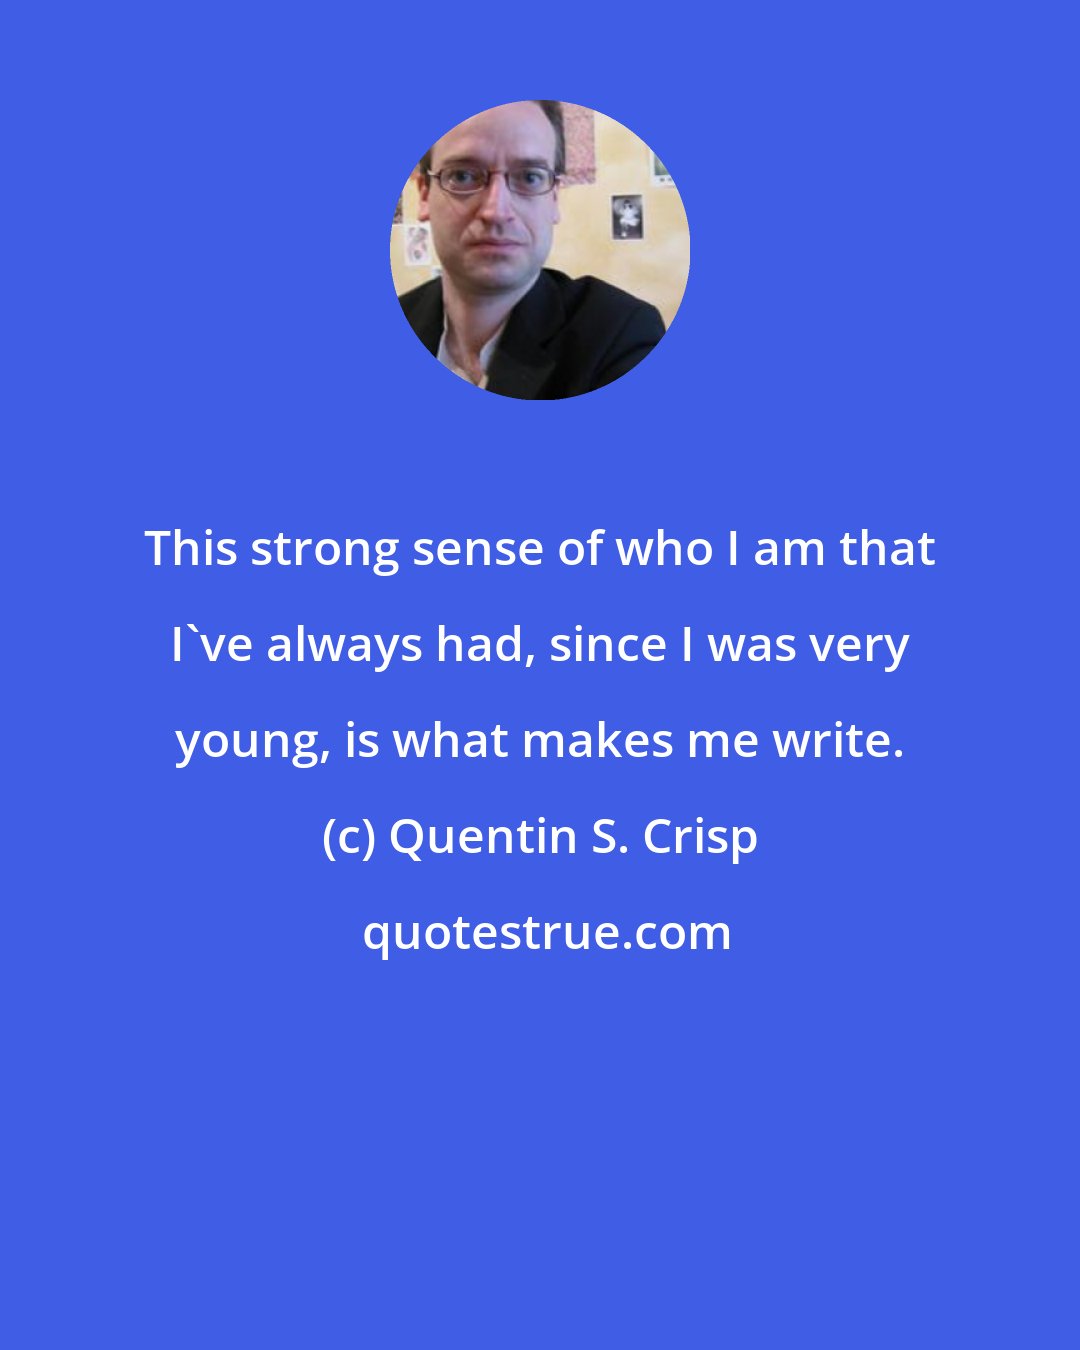 Quentin S. Crisp: This strong sense of who I am that I've always had, since I was very young, is what makes me write.